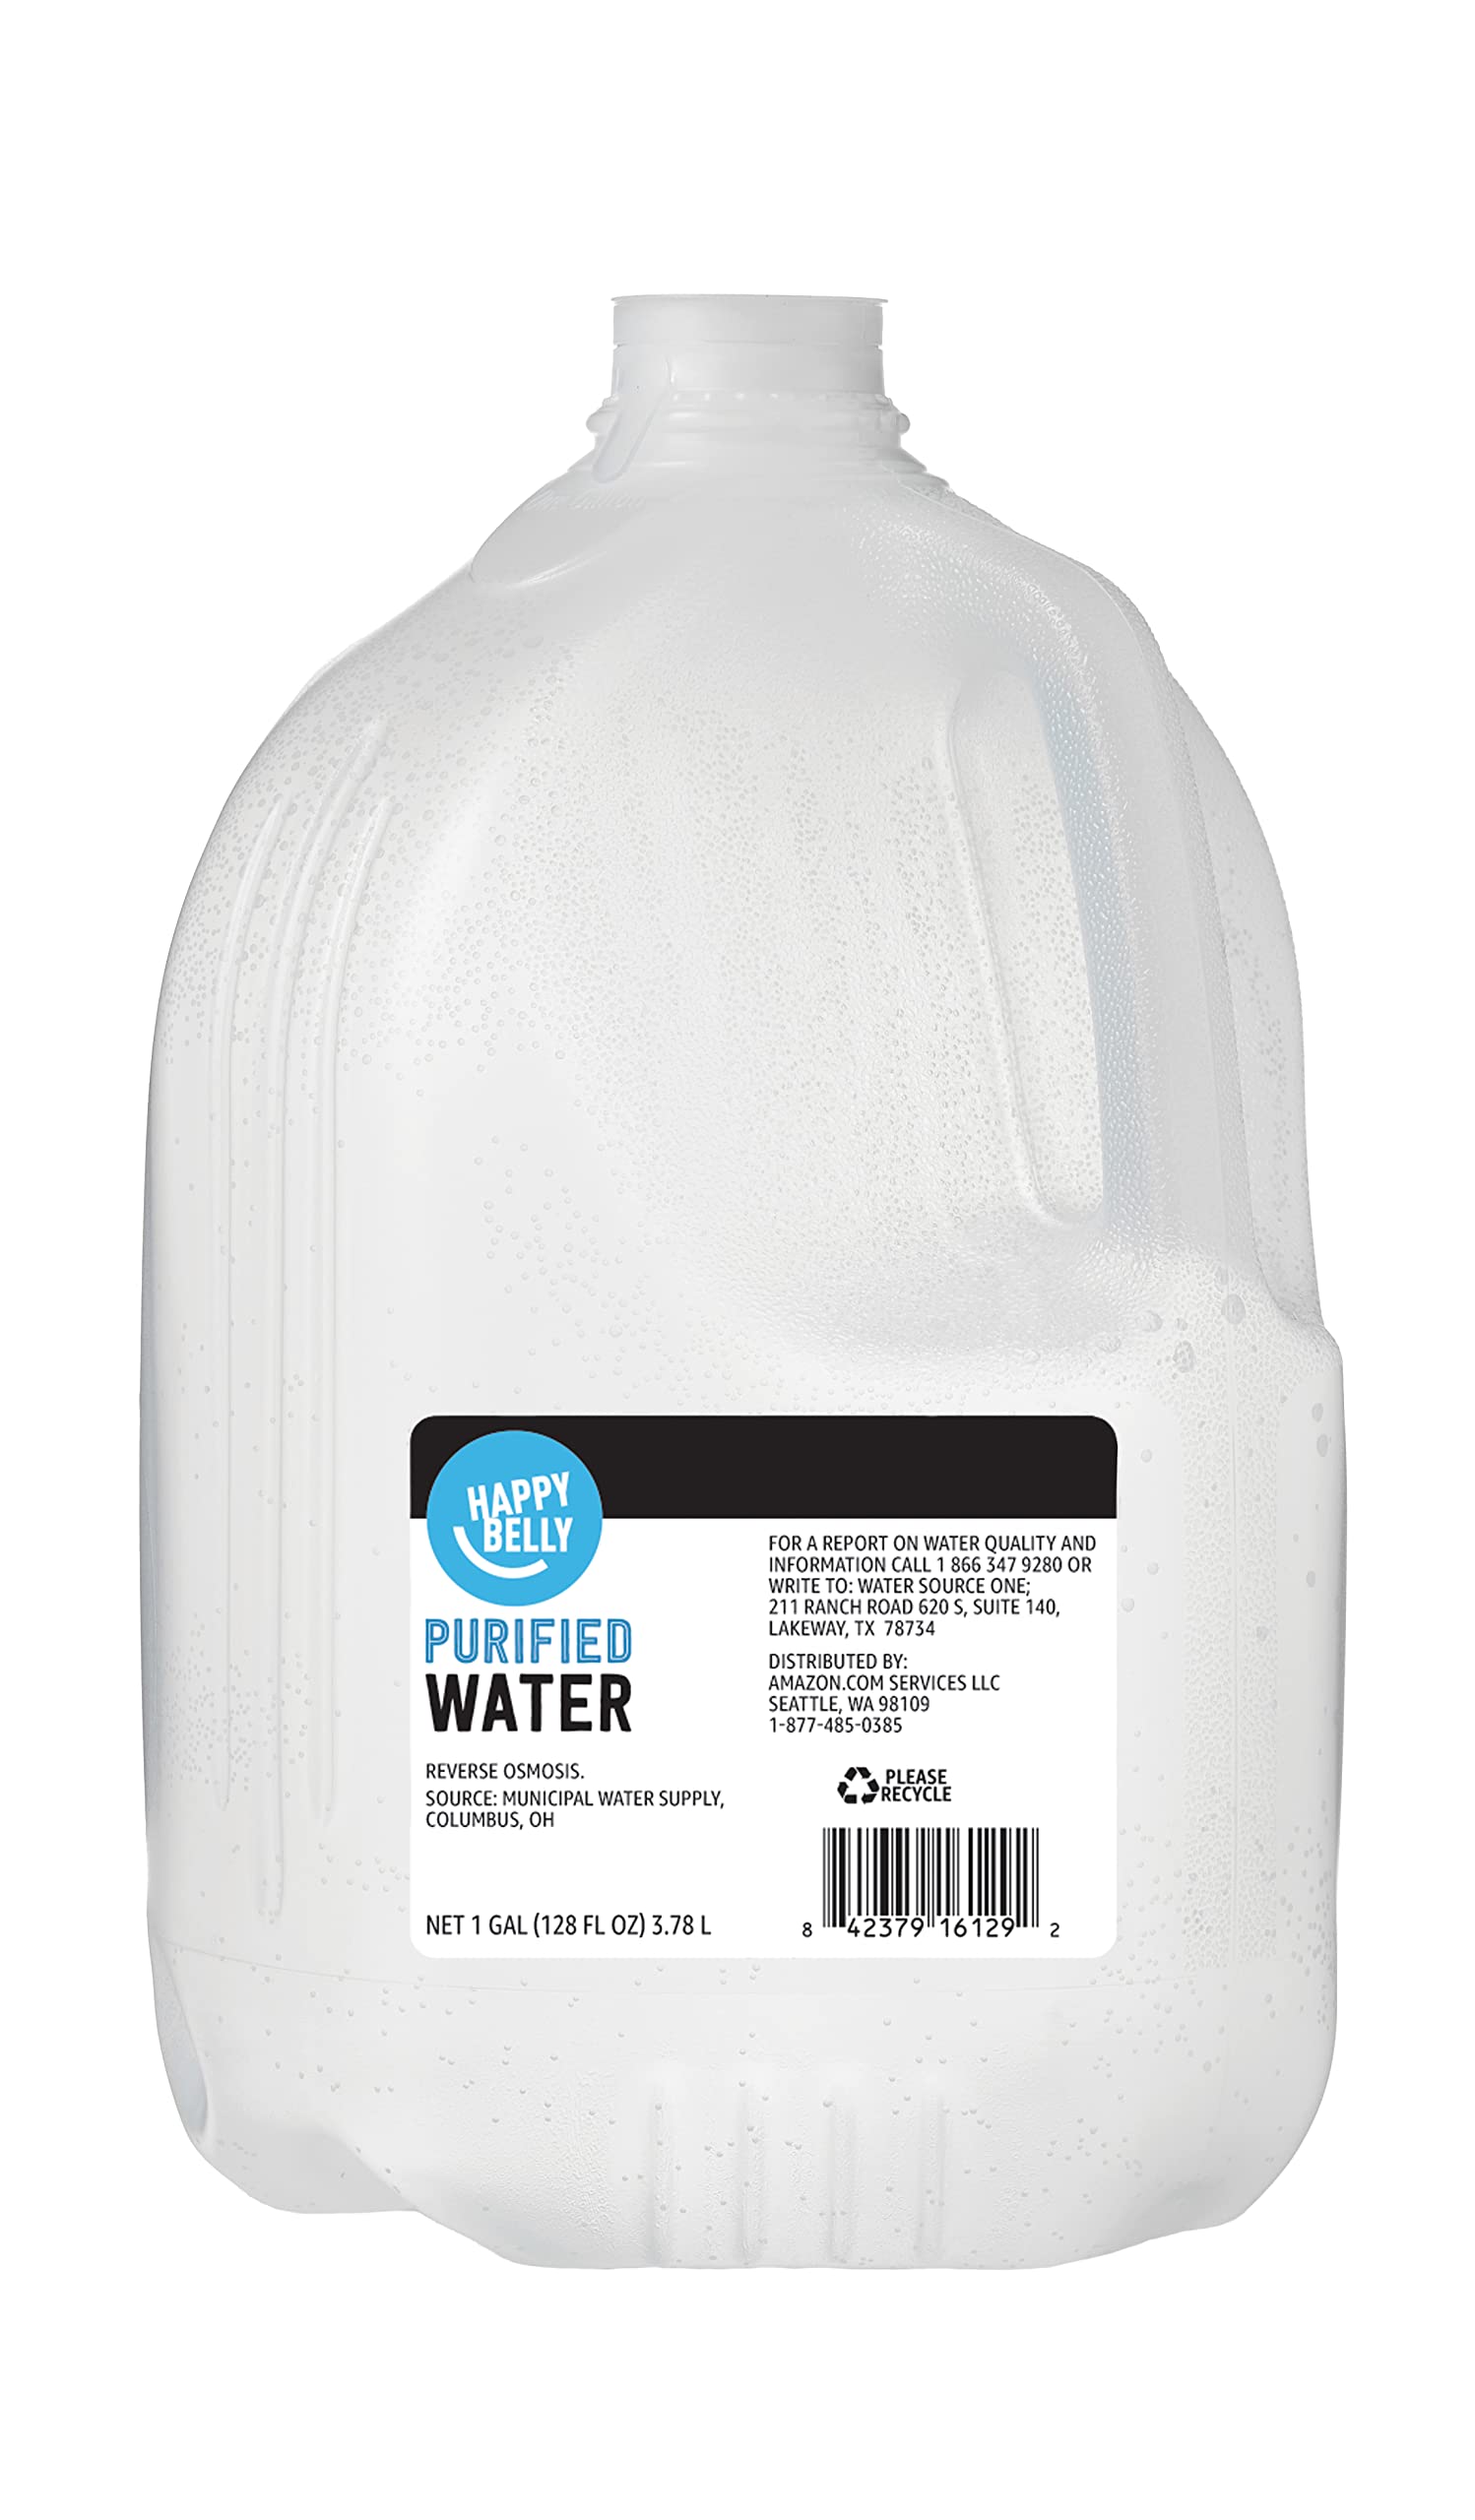 1 gallon of Happy Belly Purified Water DELIVERED $1.30